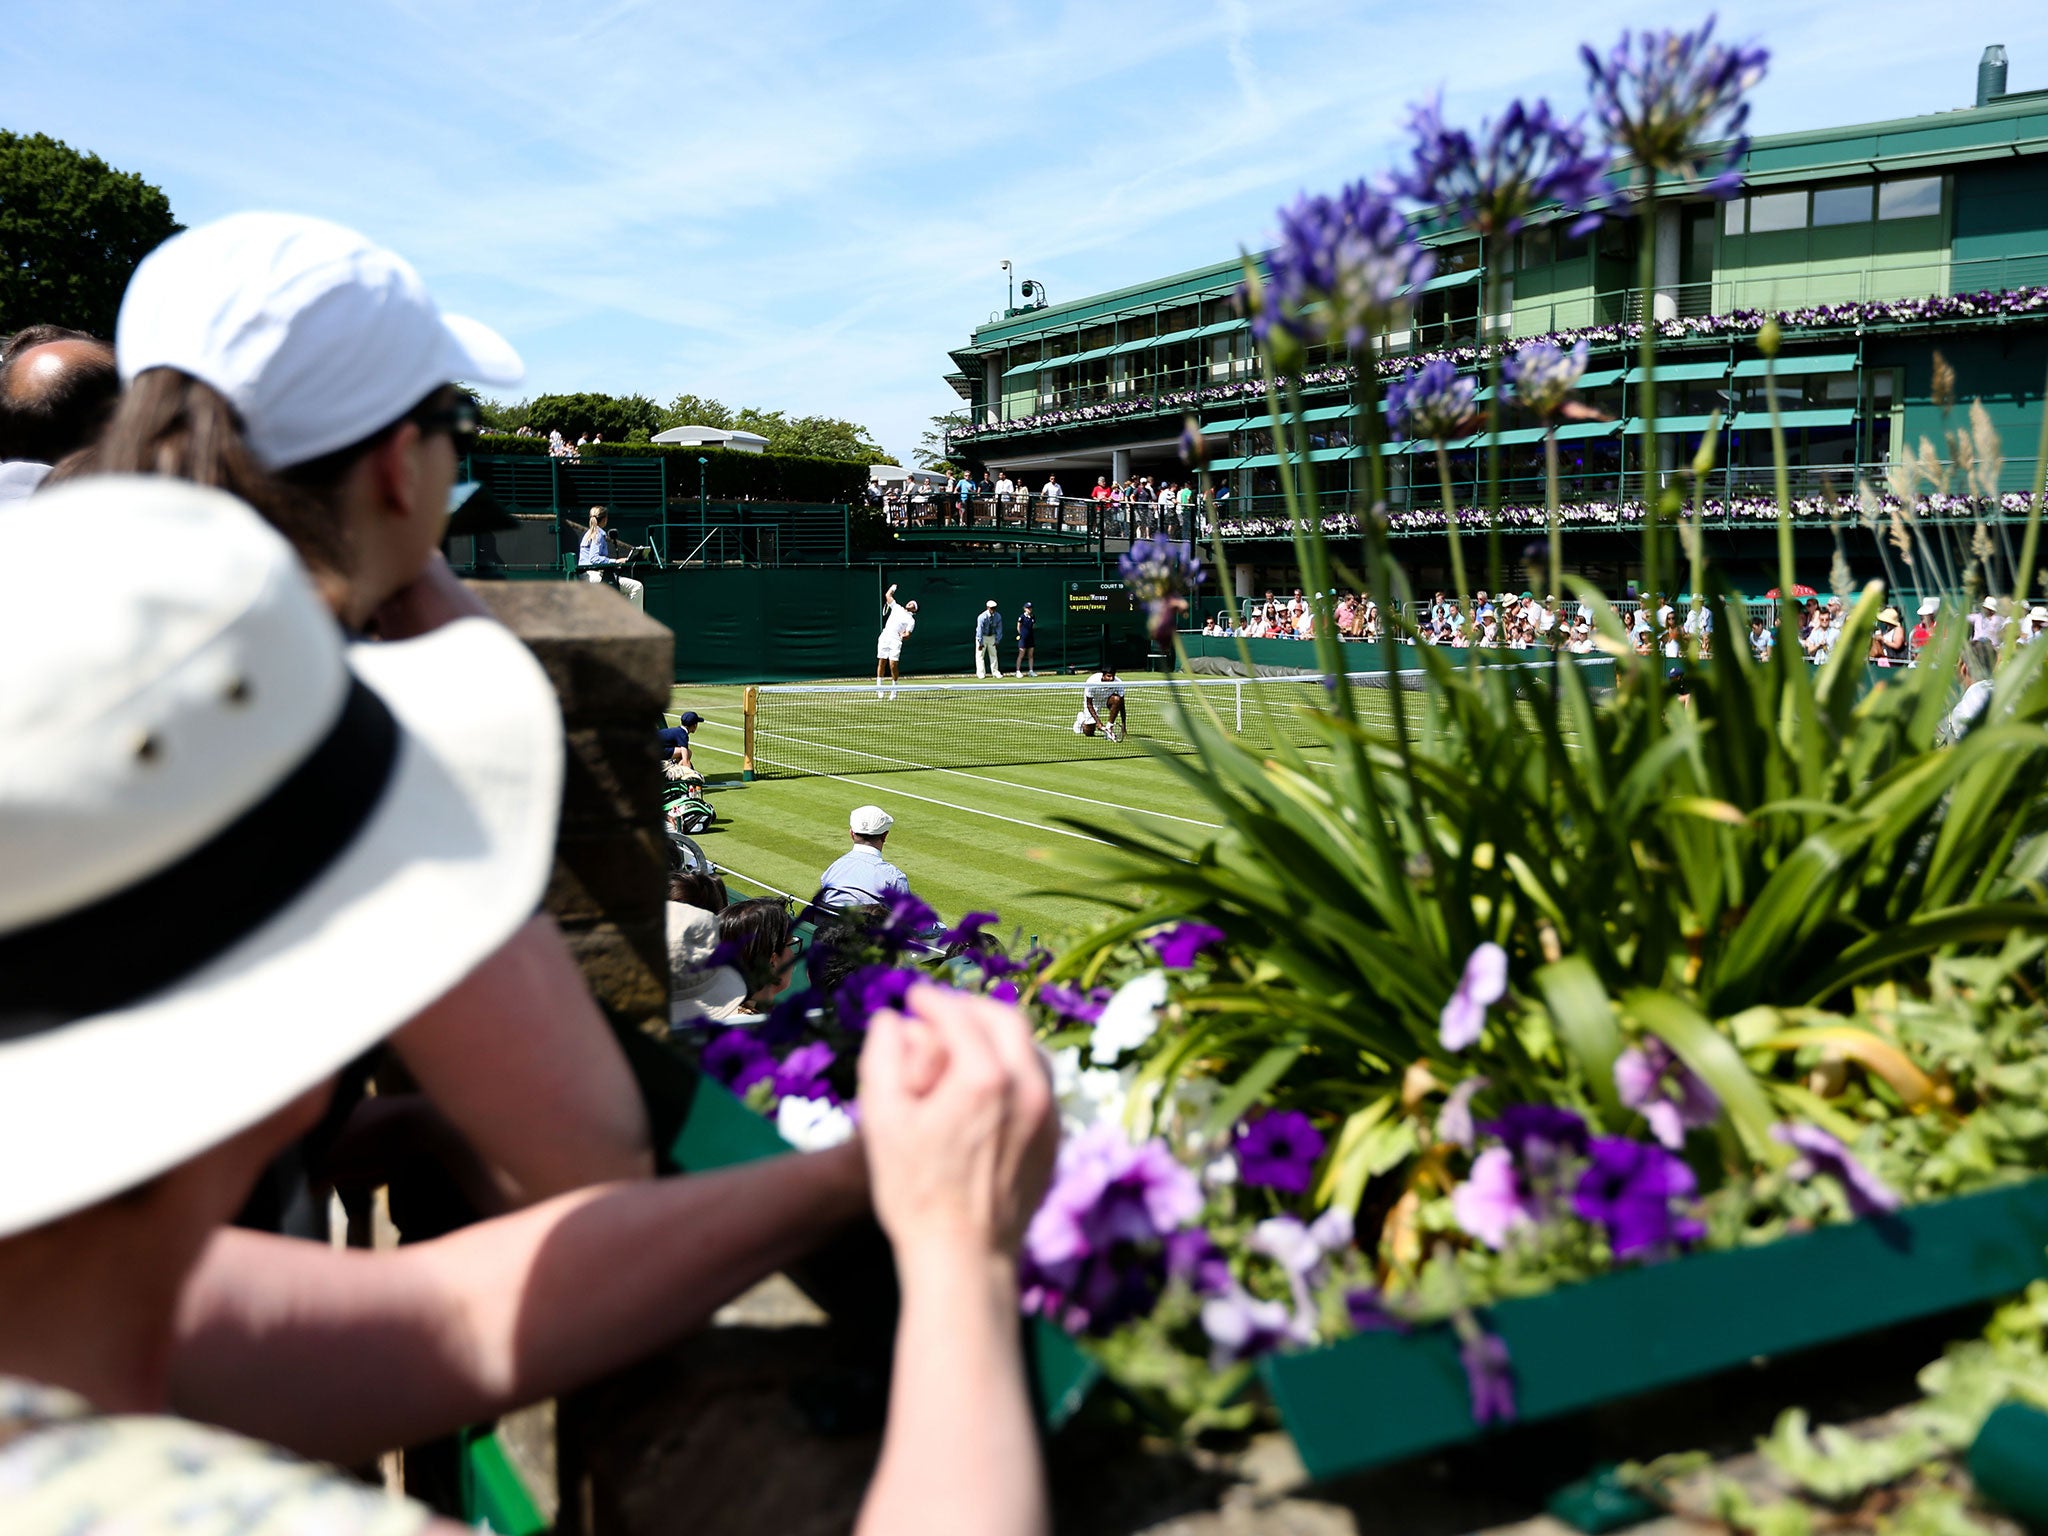 A general view of Court 19 as Florin Mergea serves on day 1 of the Wimbledon championships